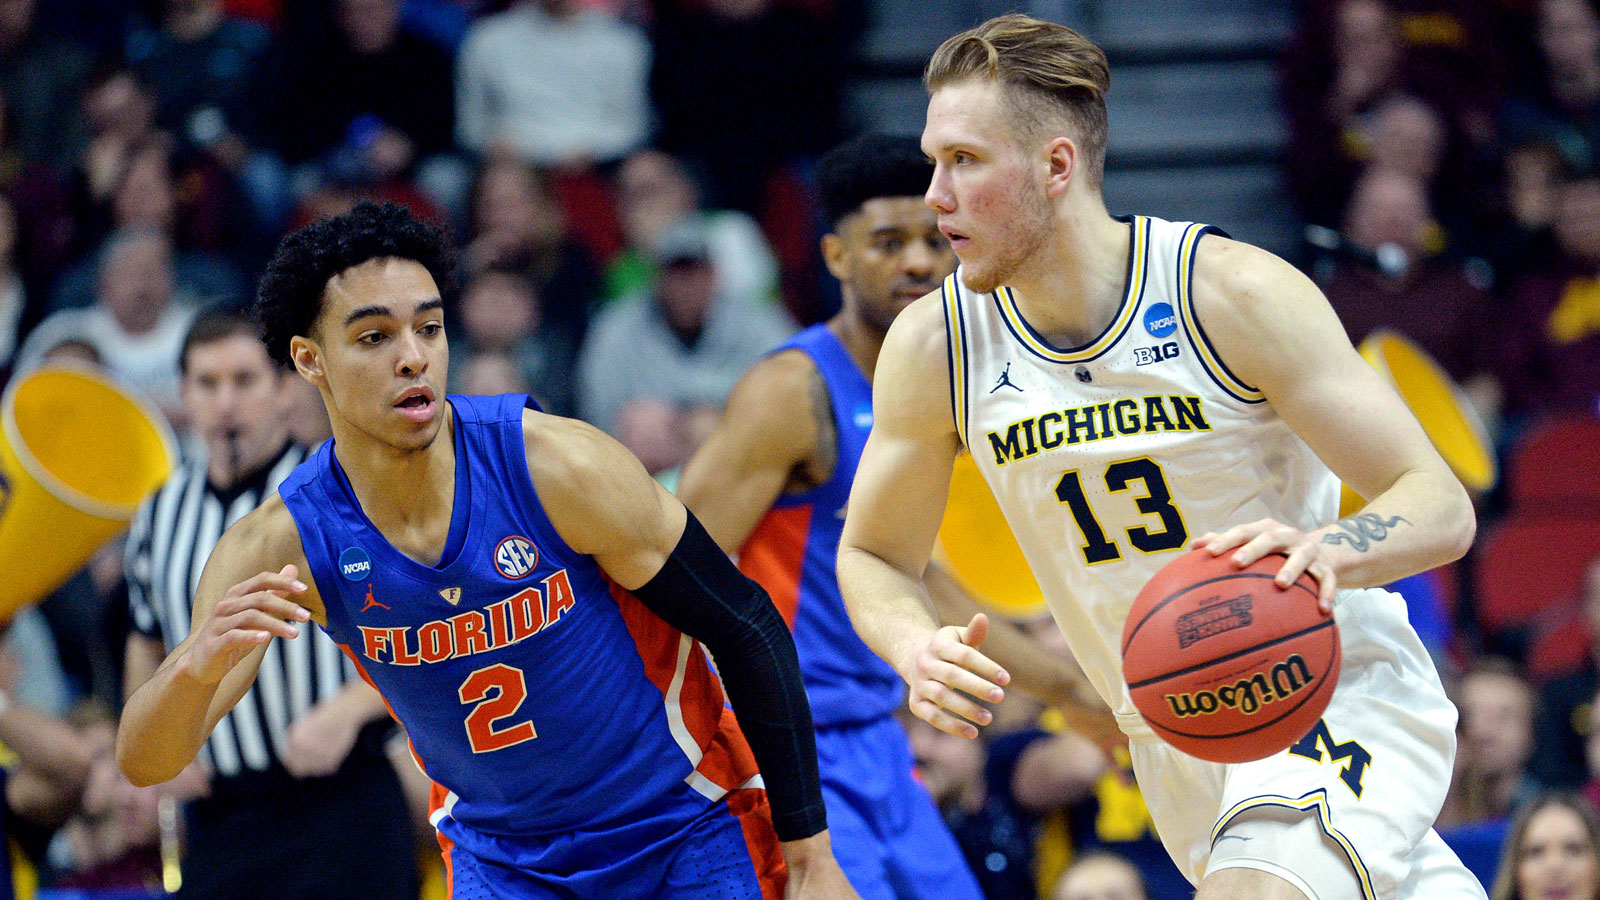 Florida goes down to Michigan in 2nd round of NCAA Tournament